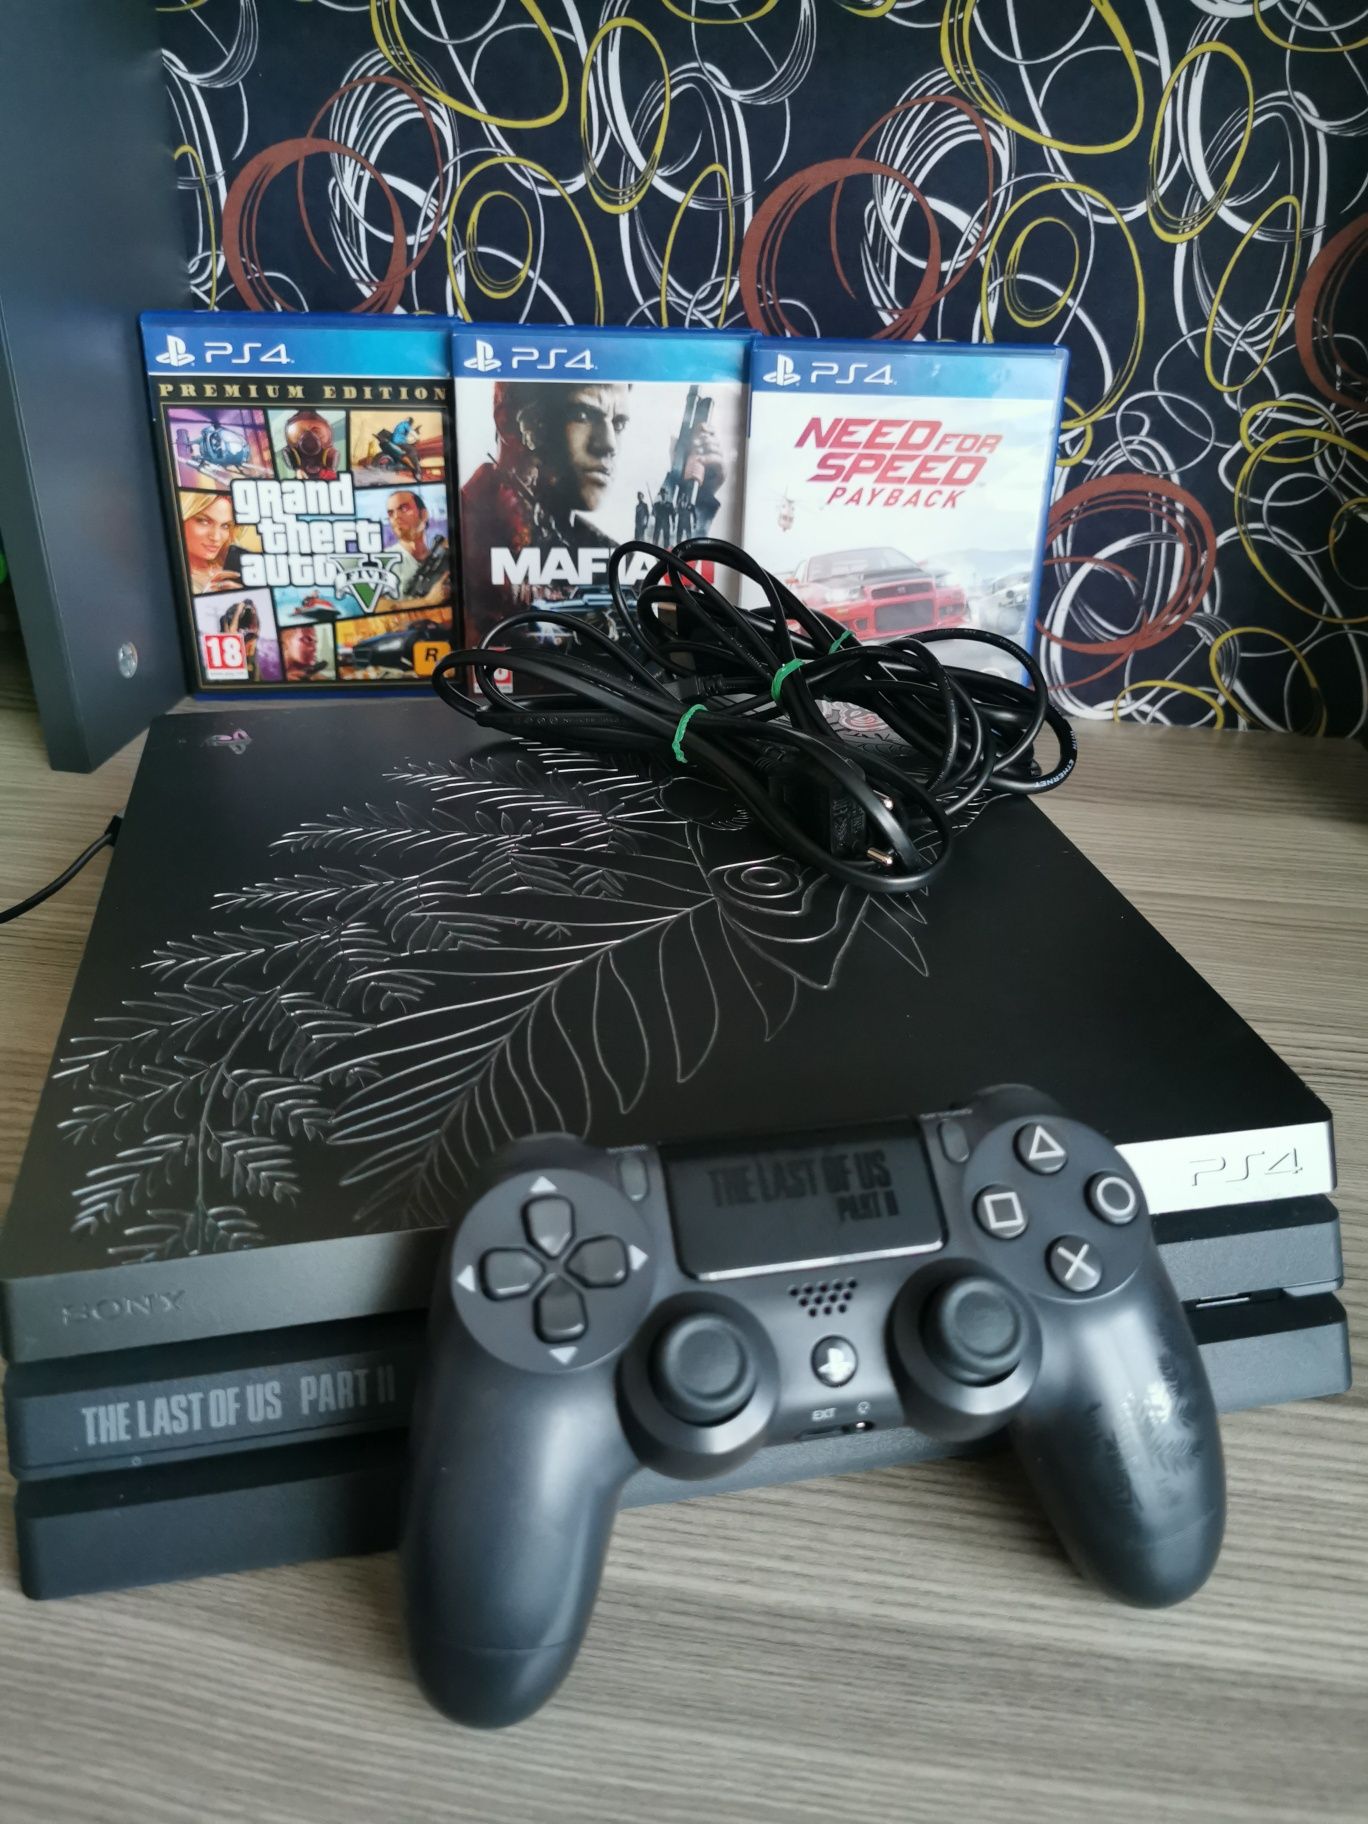 PlayStation 4 pro 1 ТВ limited edition "The Last Of Us"